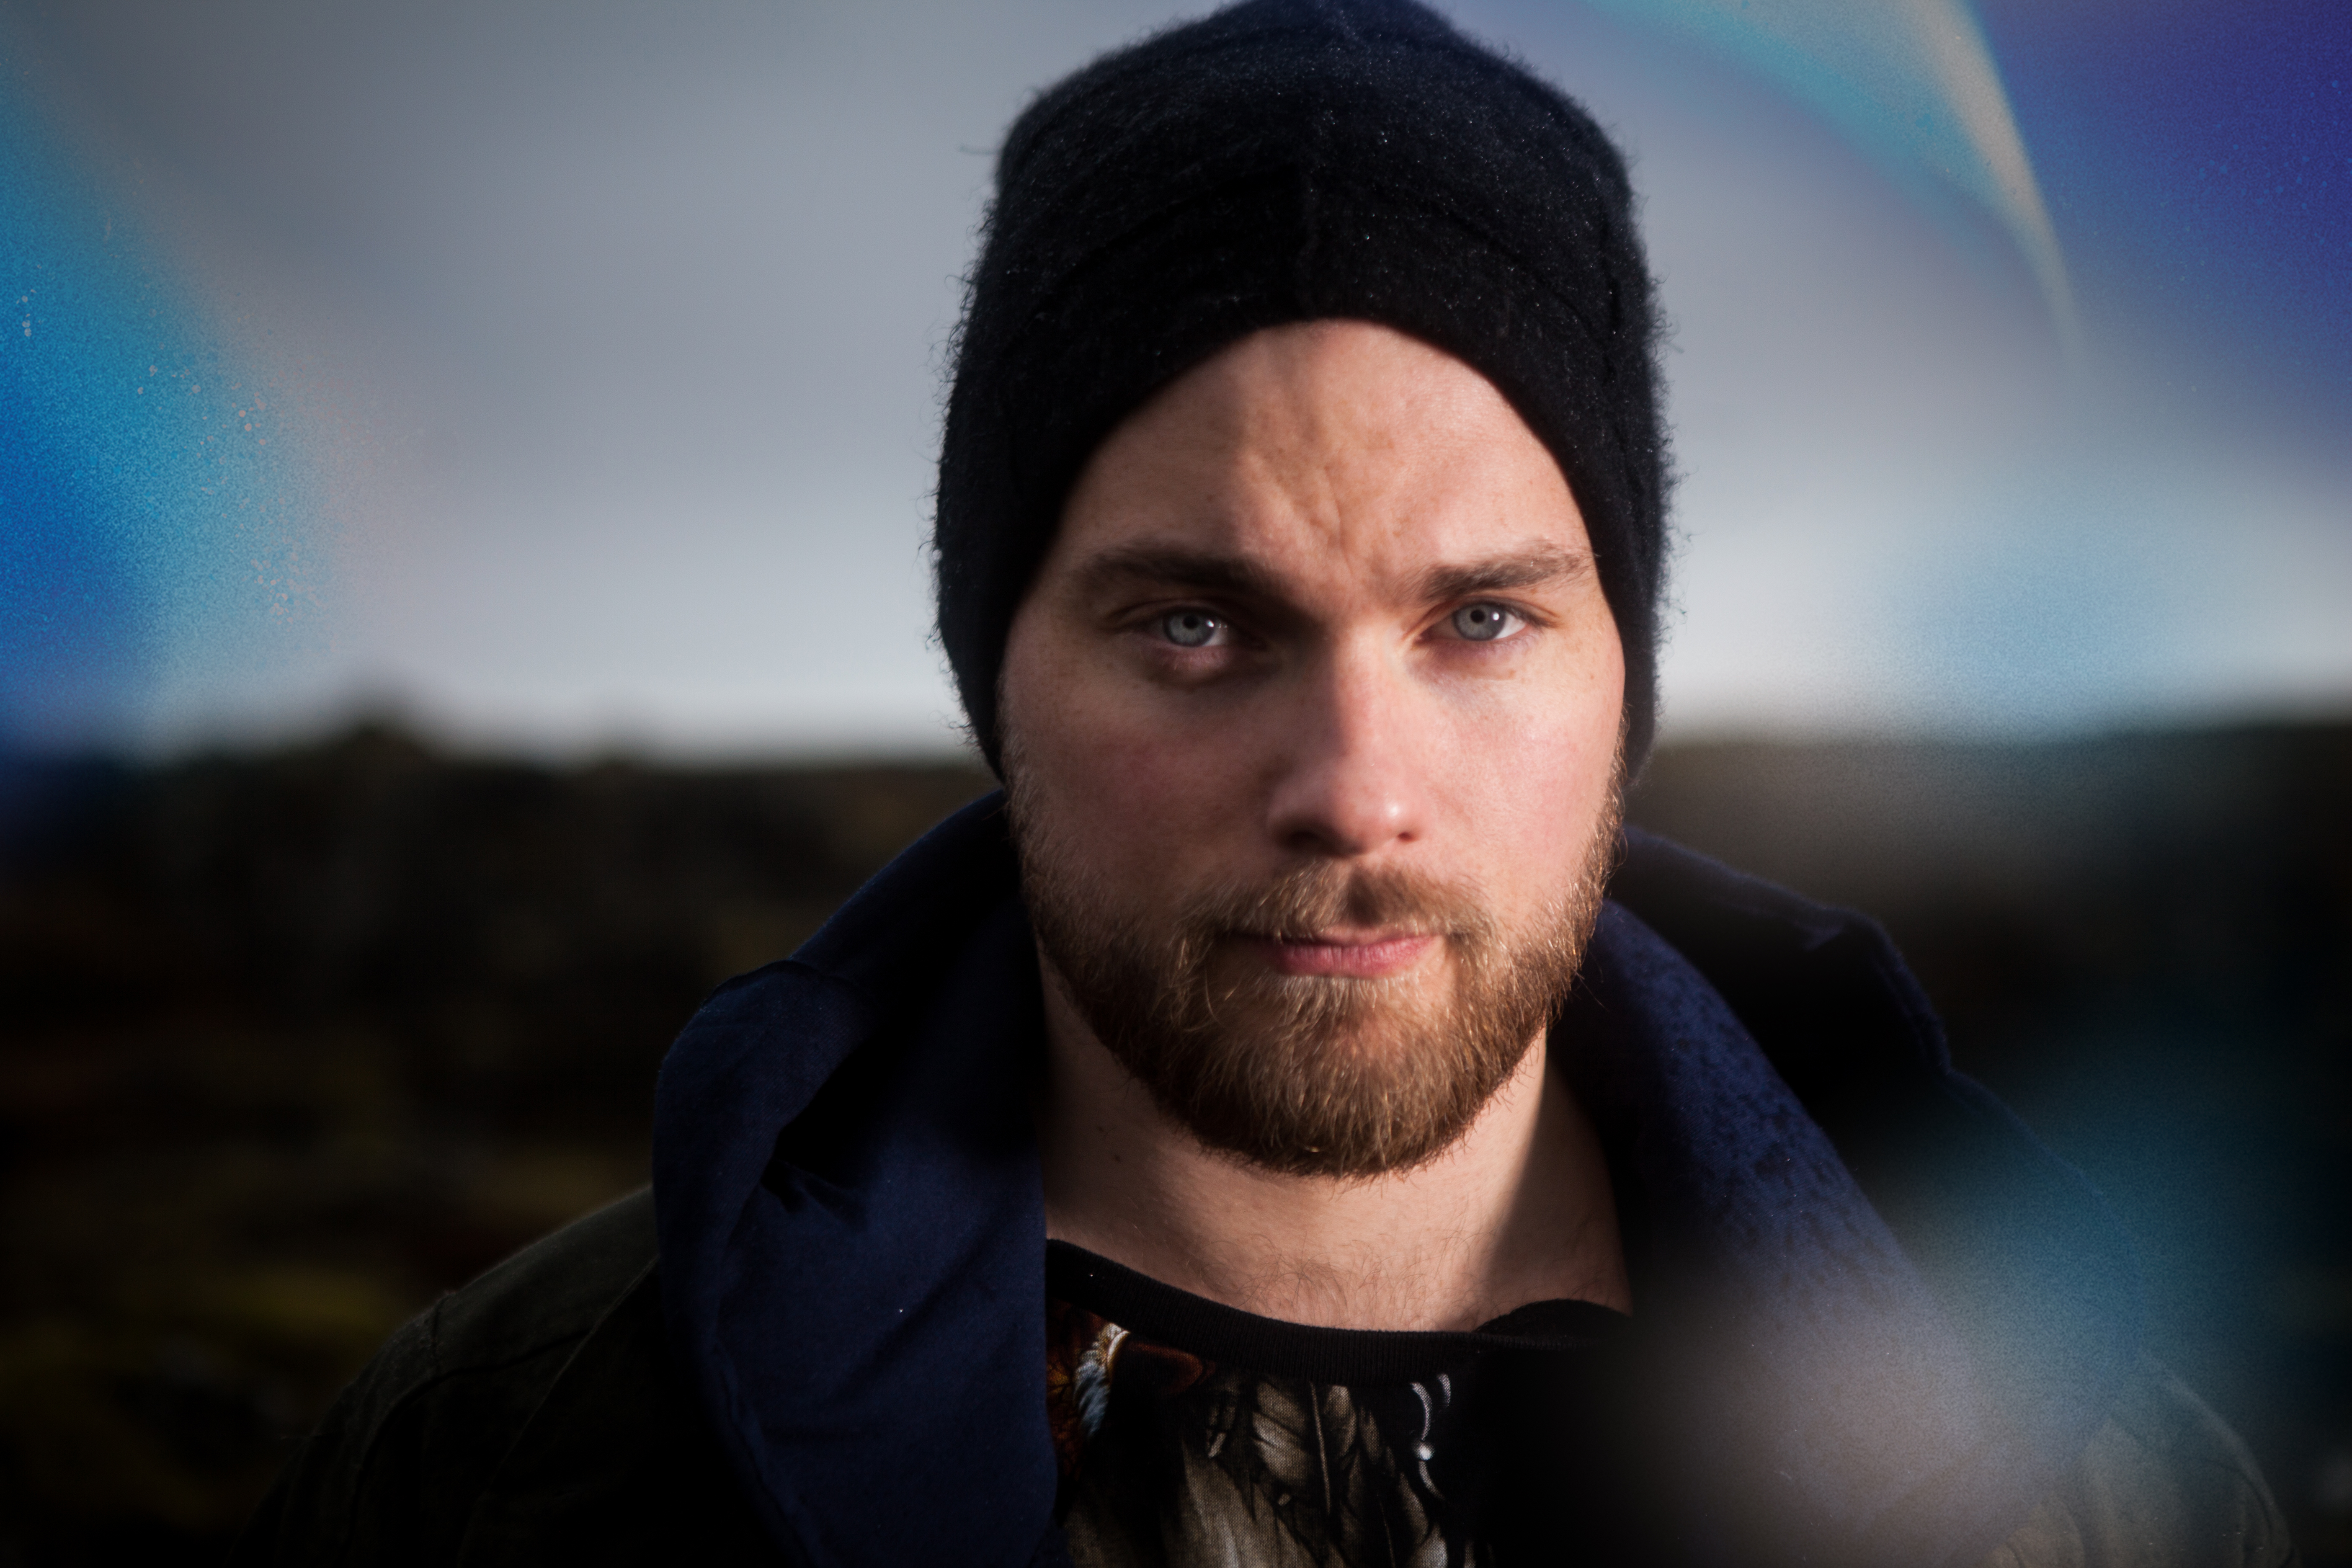 Ásgeir to record live requests for fans for "Straight to Vinyl".